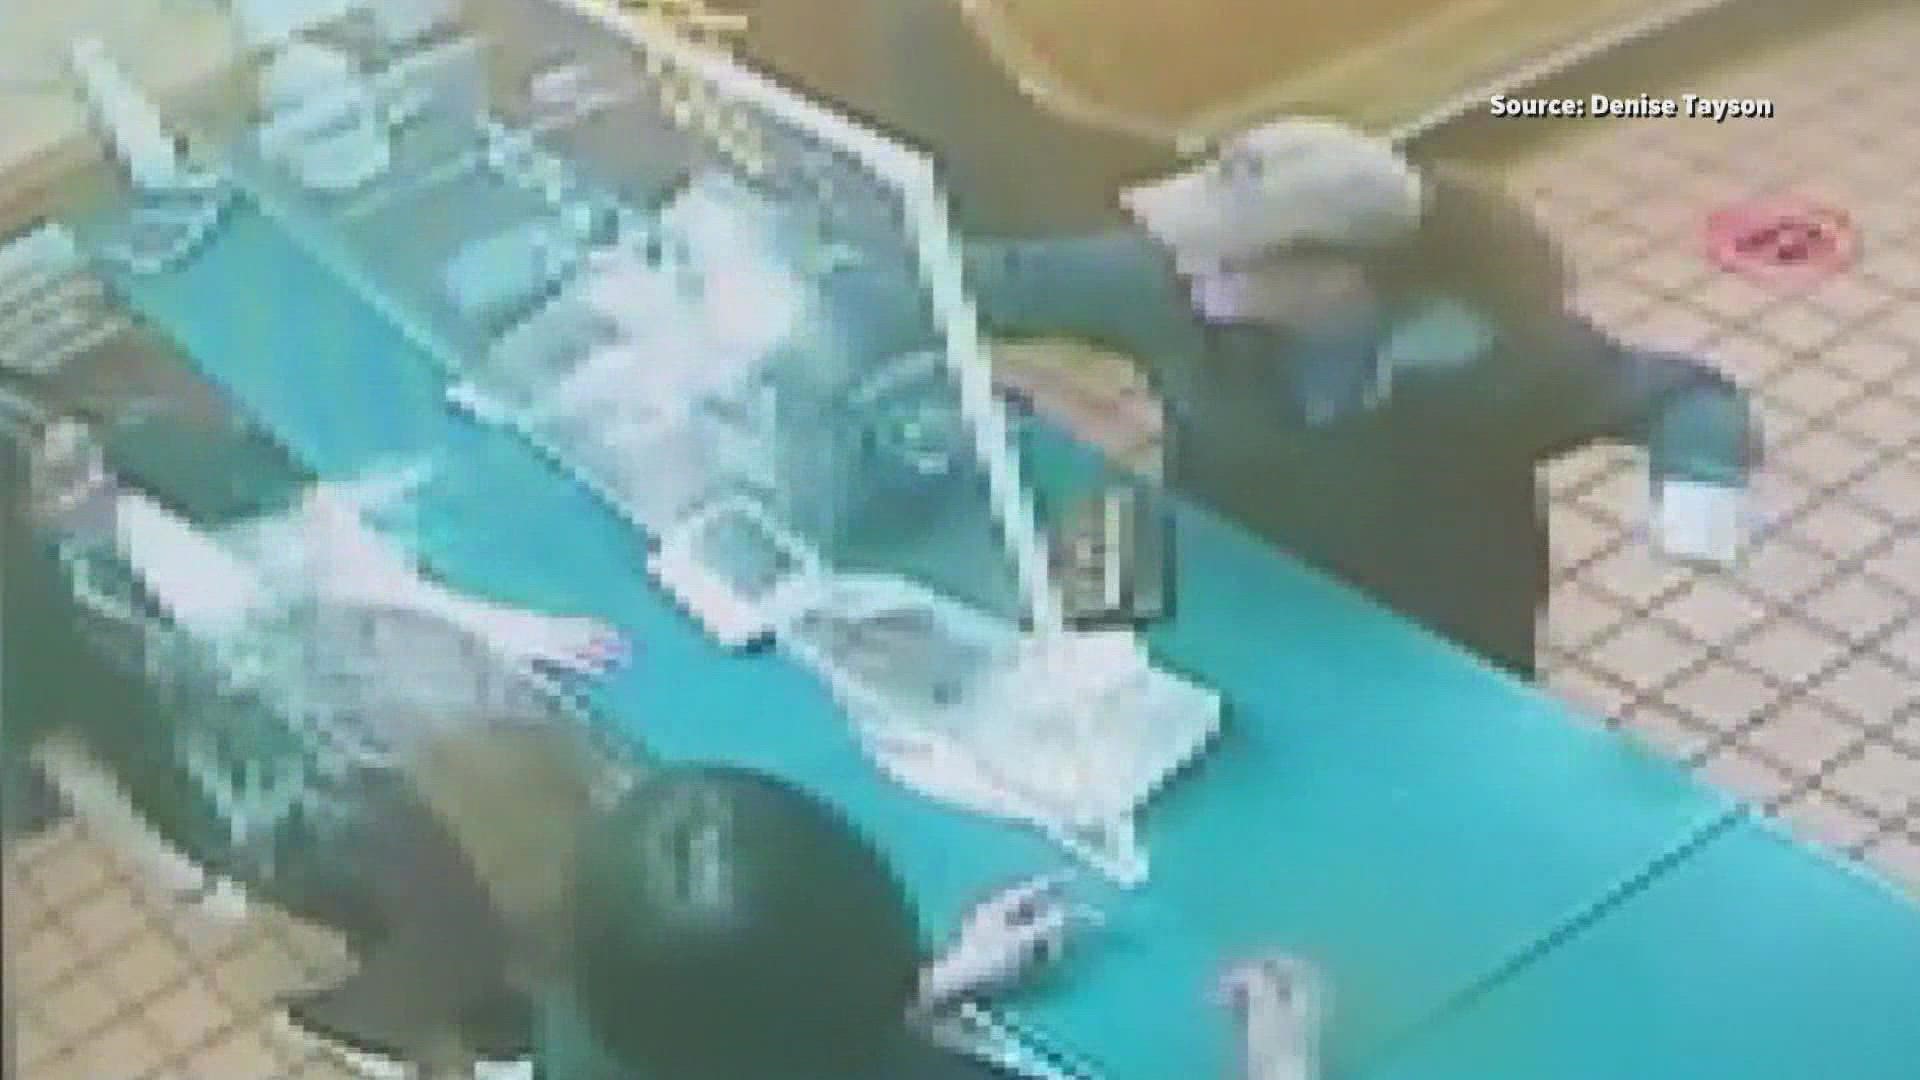 Video shows the woman tossing hot soup across the counter at a teenage employee.